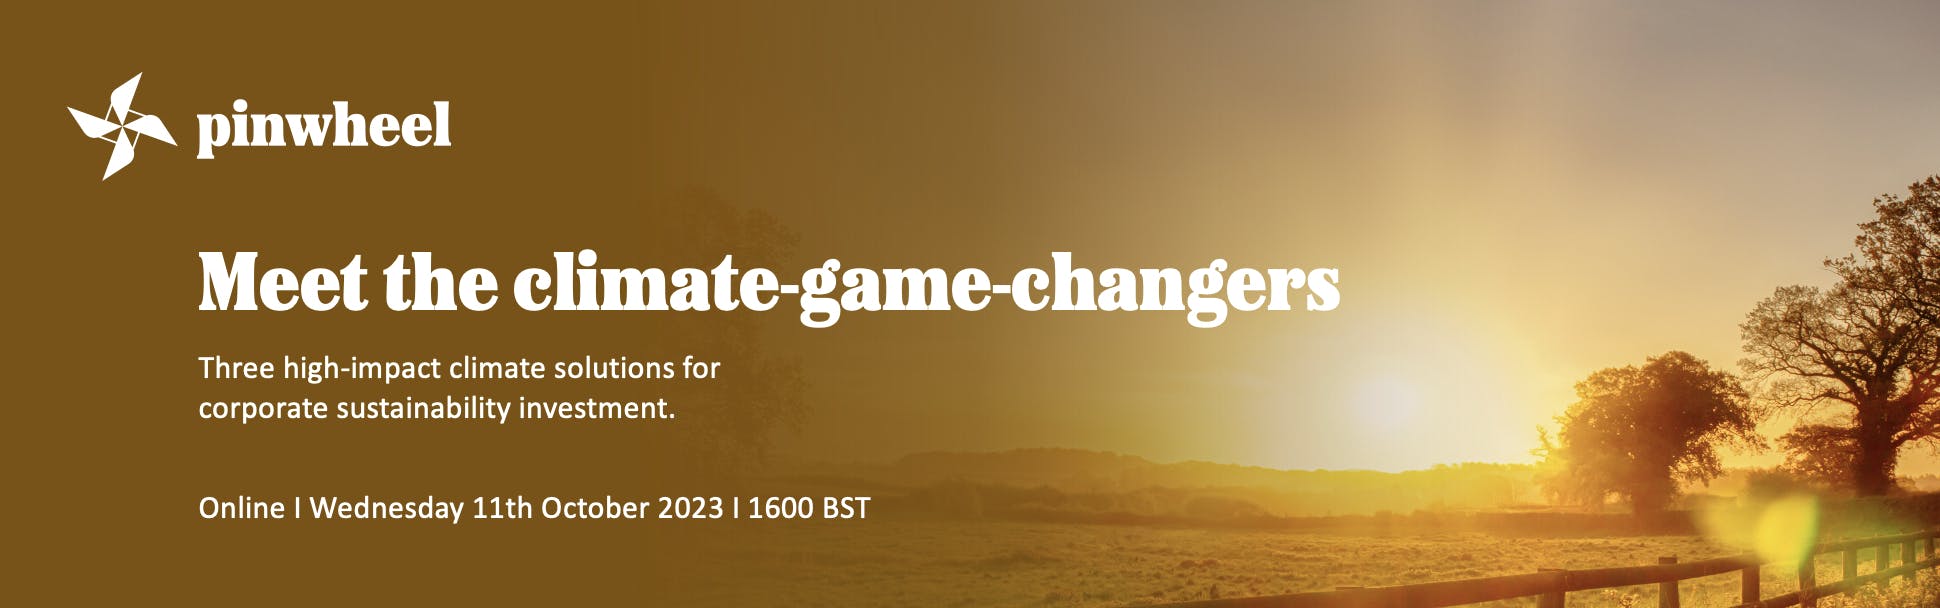 A poster for Meet the climate-game-changers